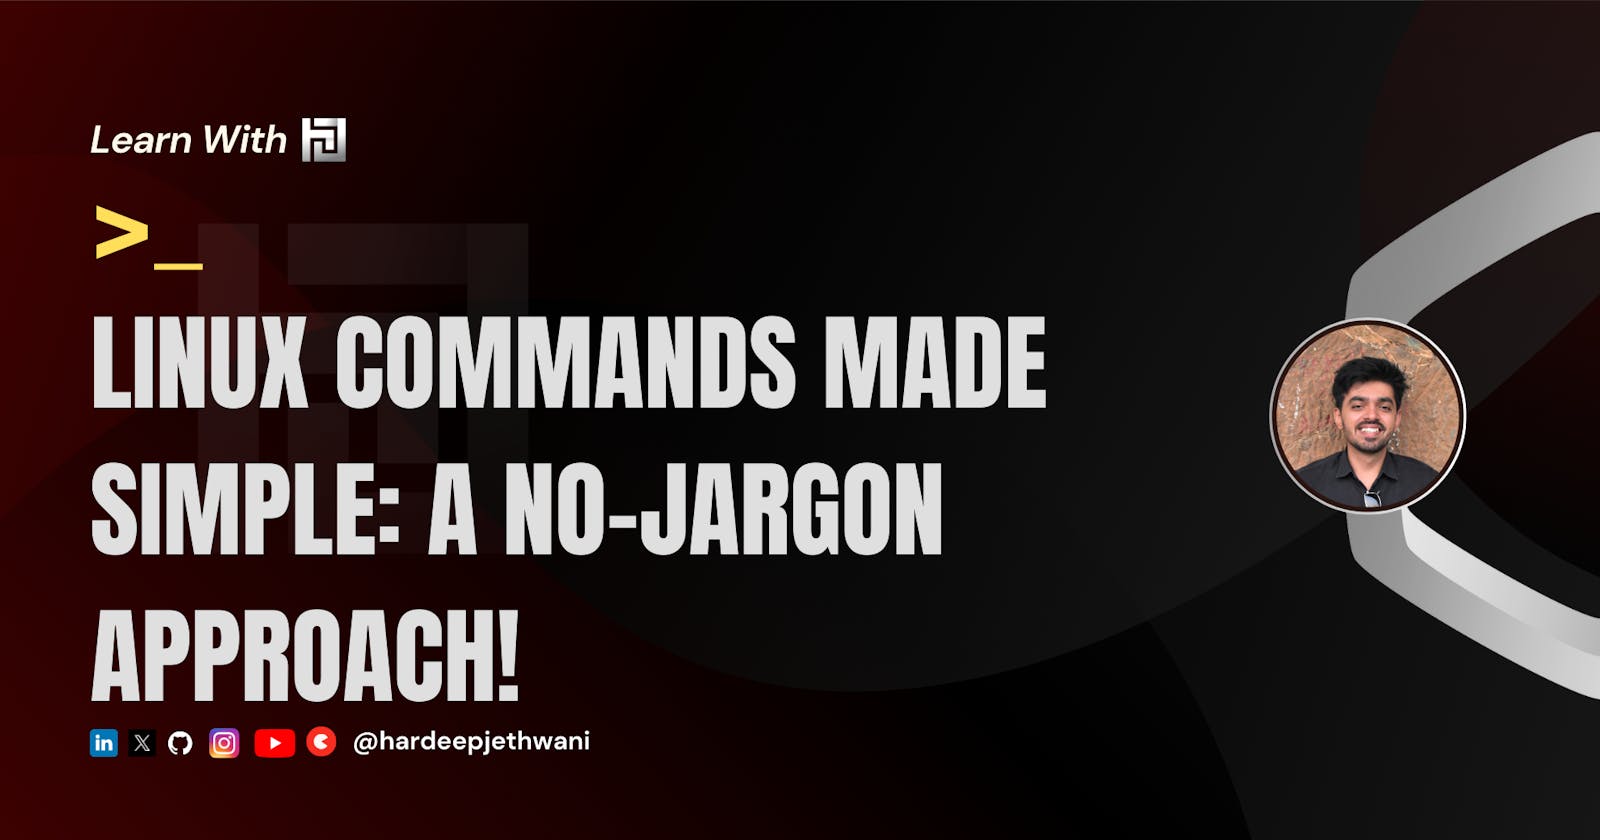 Linux Commands Made Simple: A No-Jargon Approach!